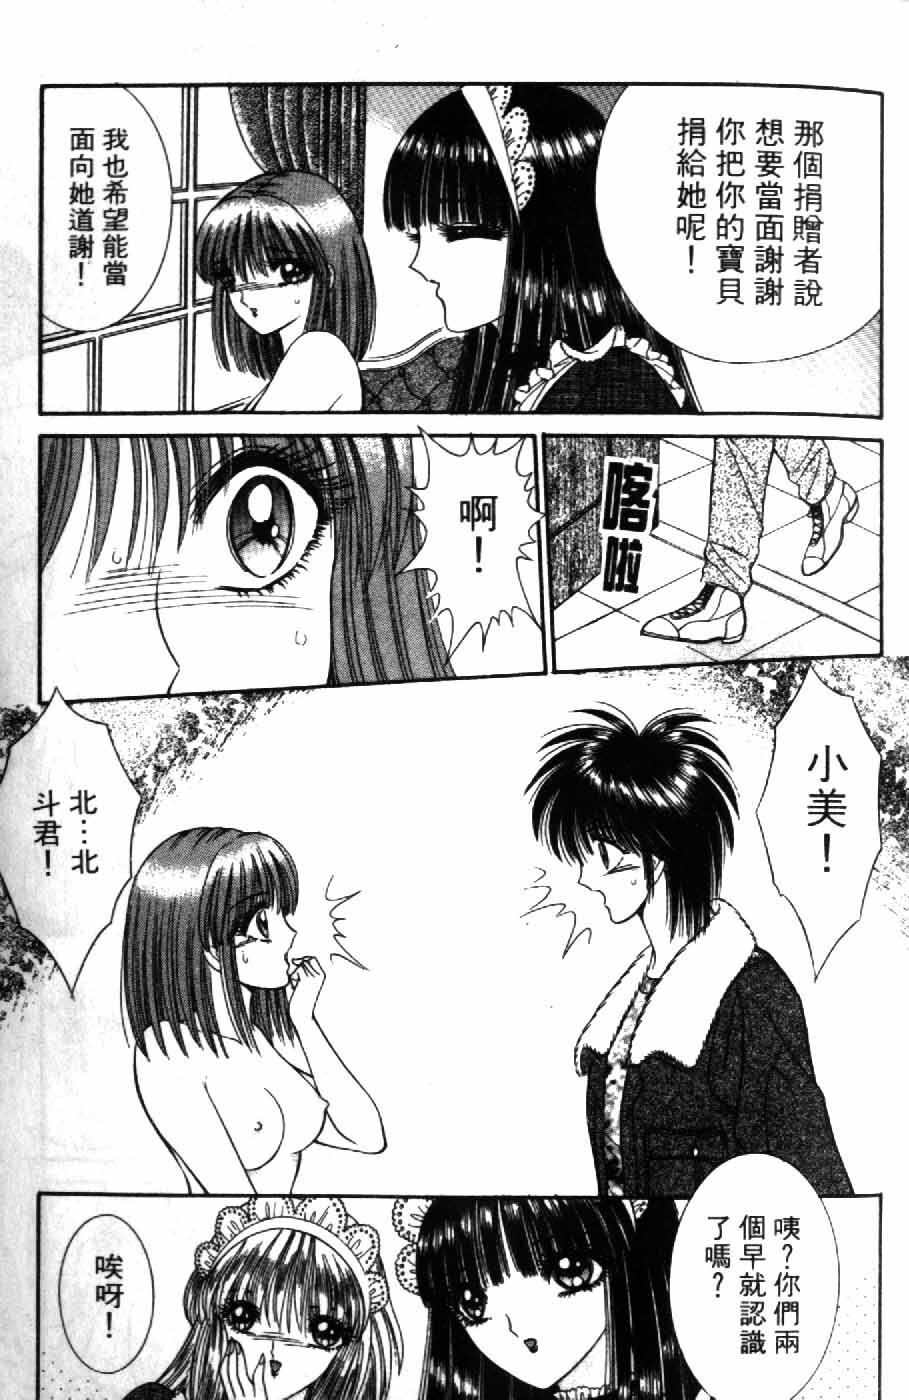 [Senno Knife] Ouma ga Horror Show 2 - Trans Sexual Special Show 2 | 顫慄博覽會 2 [Chinese] page 37 full